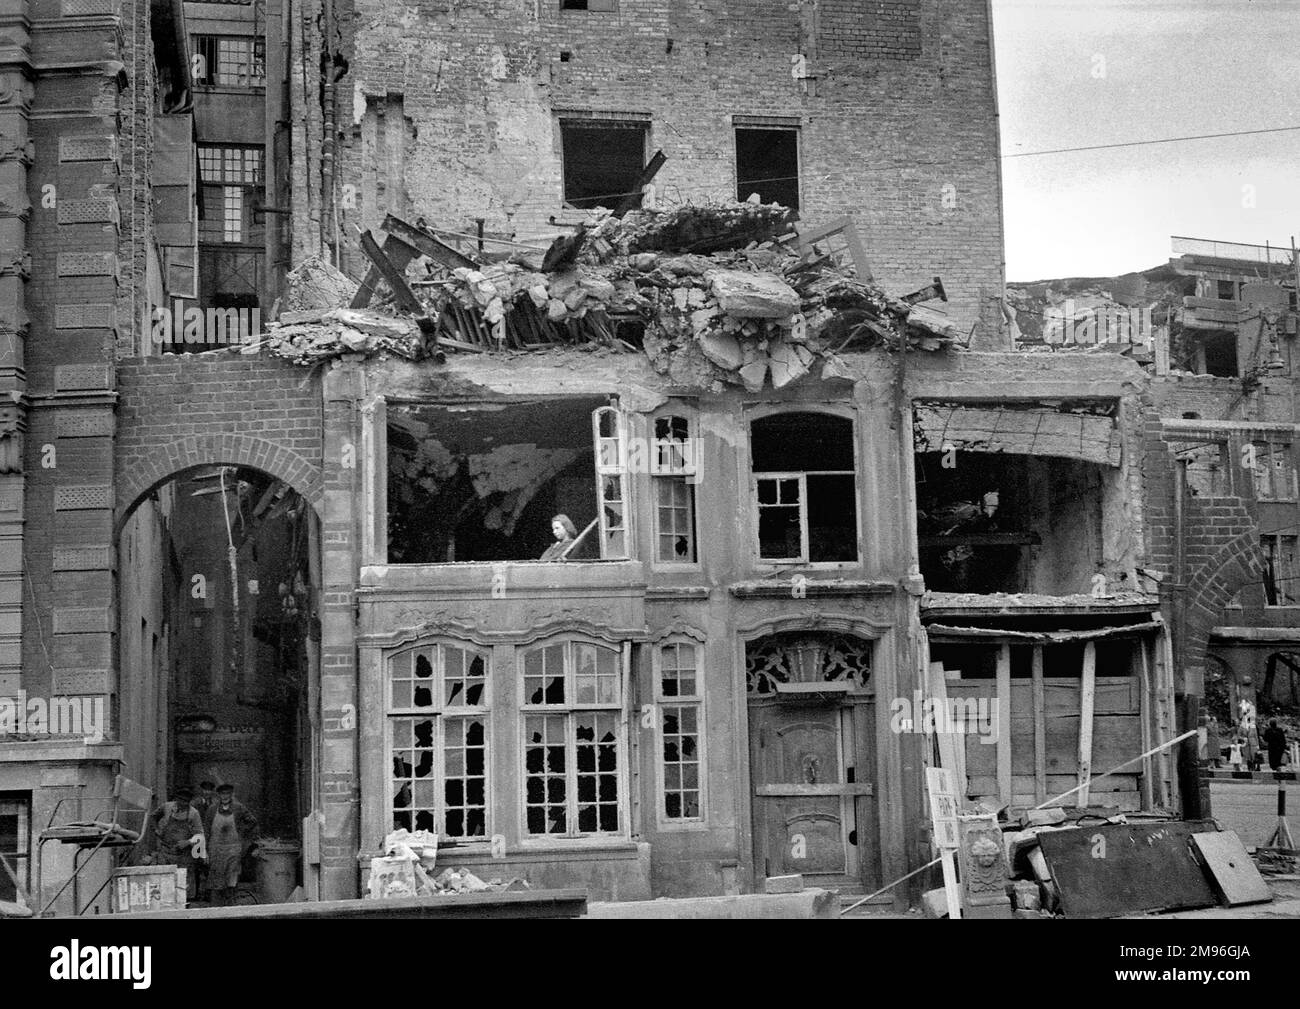 A bomb damaged building in Germany during the Second World War. Stock Photo